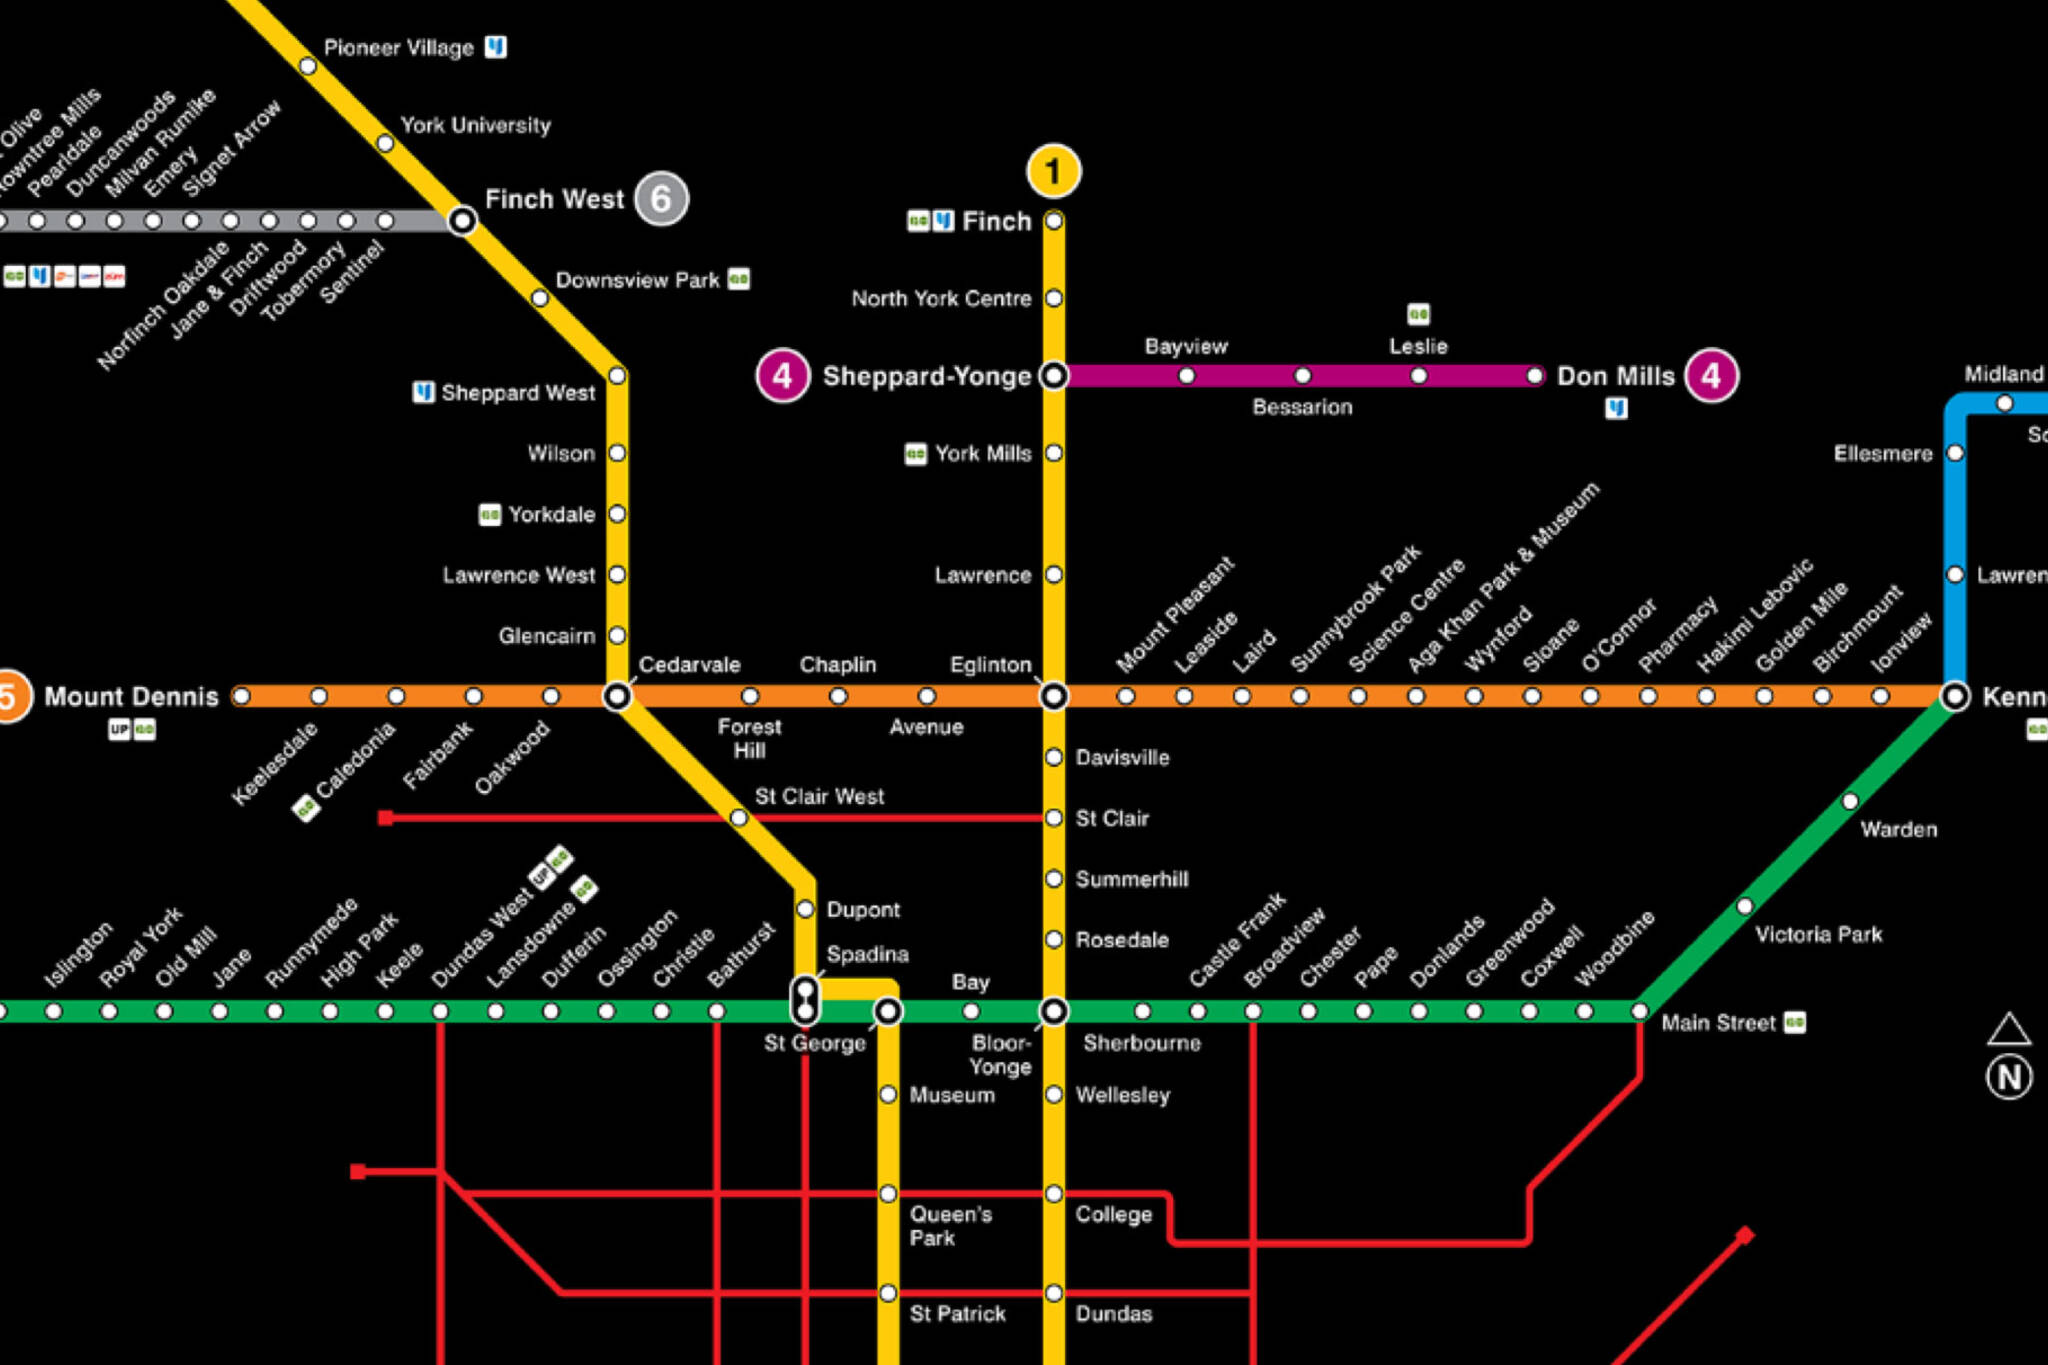 202125 Ttc Subway Map5 ?w=2048&cmd=resize Then Crop&height=1365&quality=70